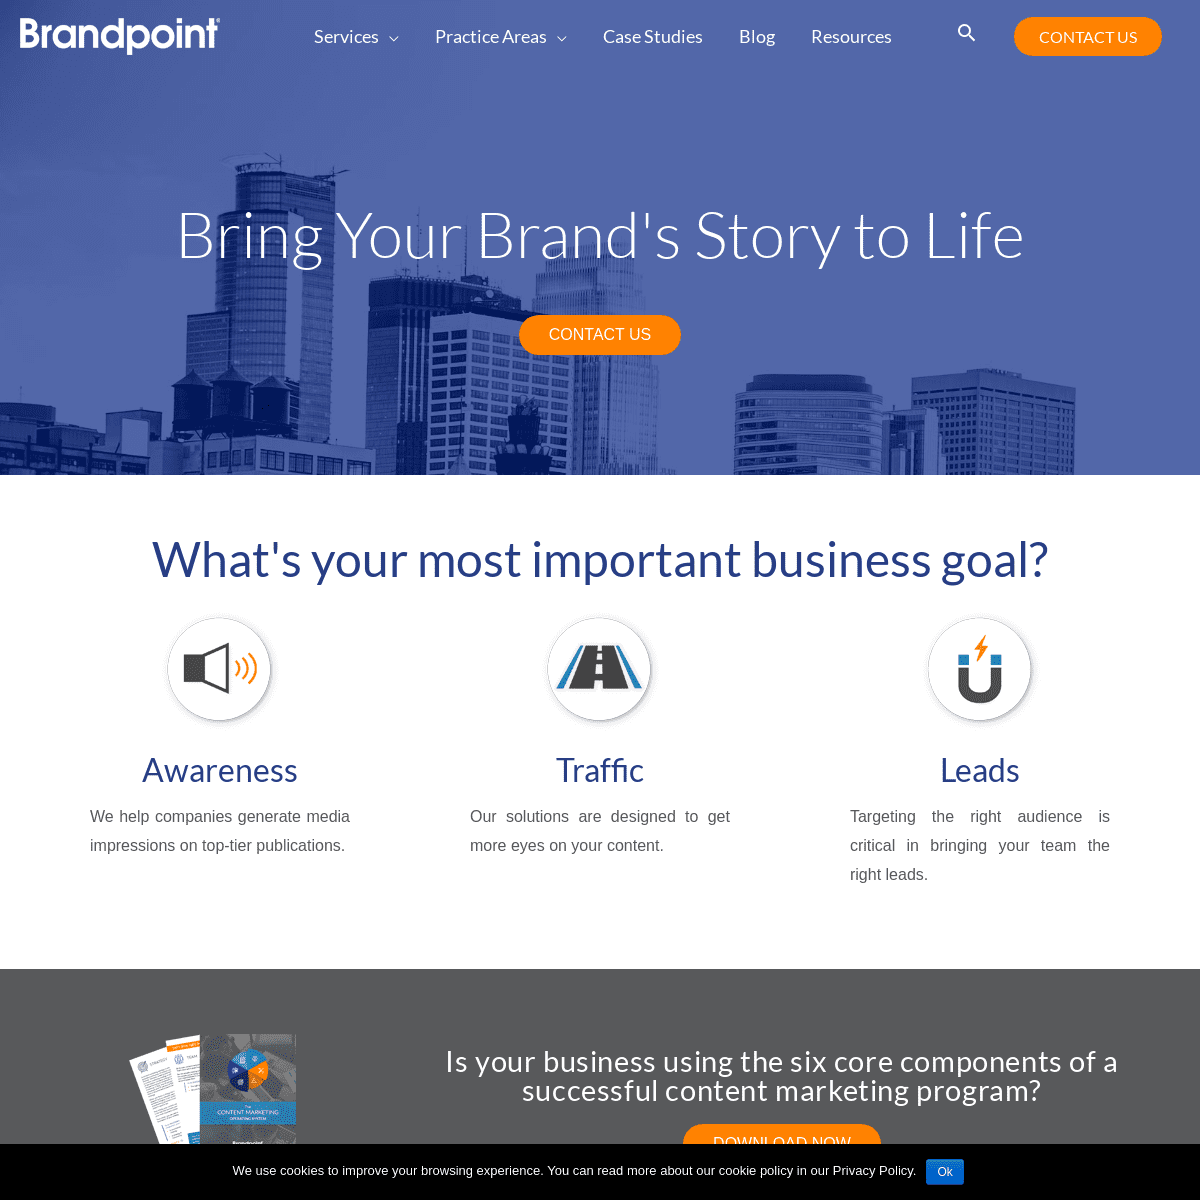 A complete backup of brandpoint.com